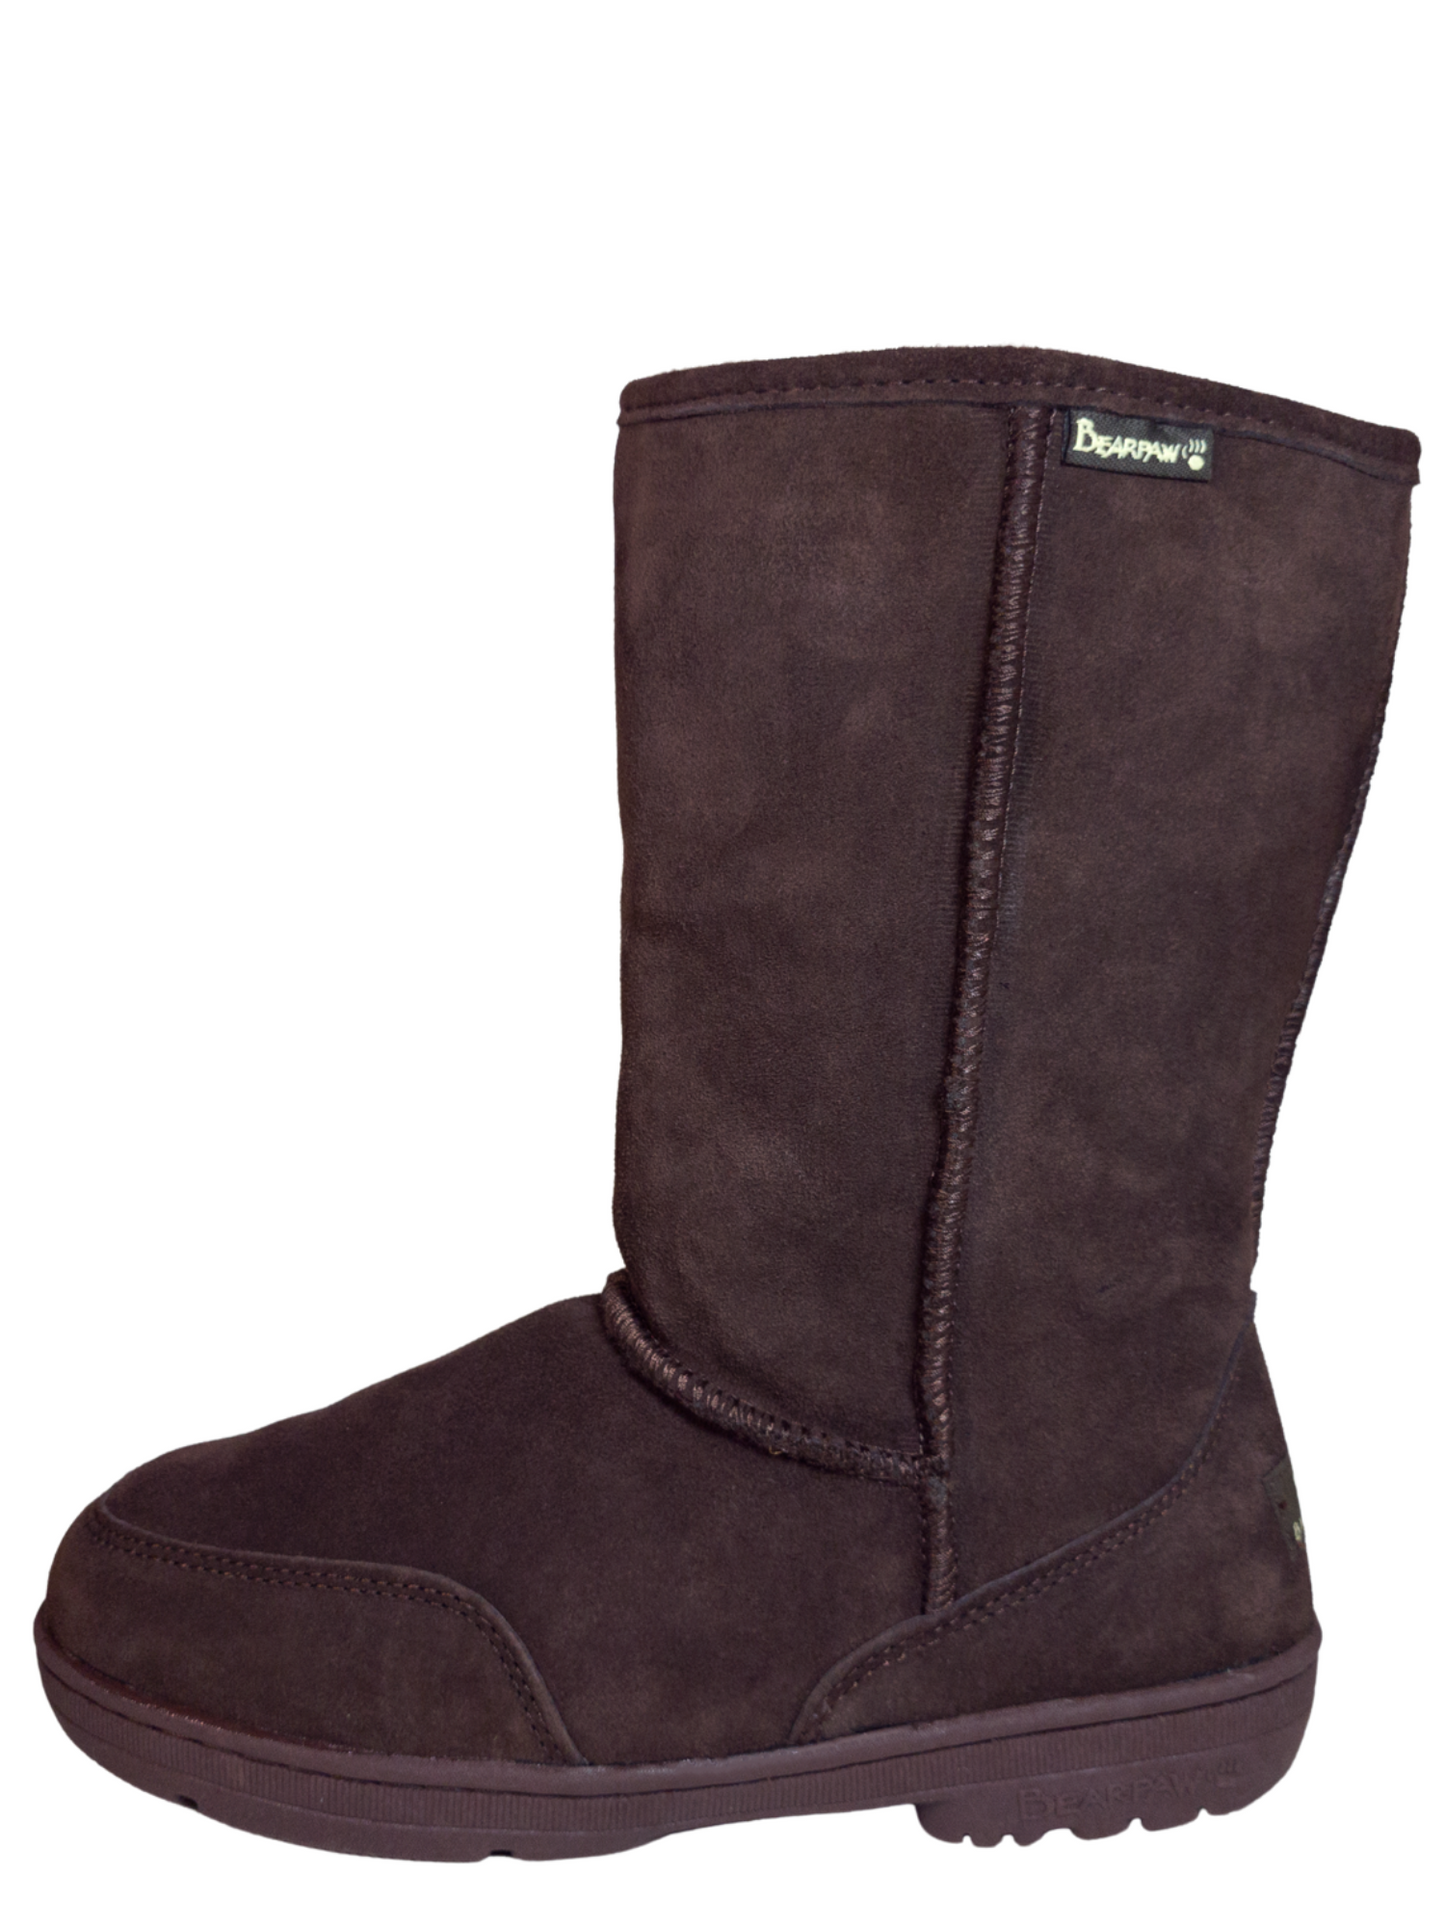 Casual Suede Leather Winter Boots for Women 'Bearpaw' - ID: 7123